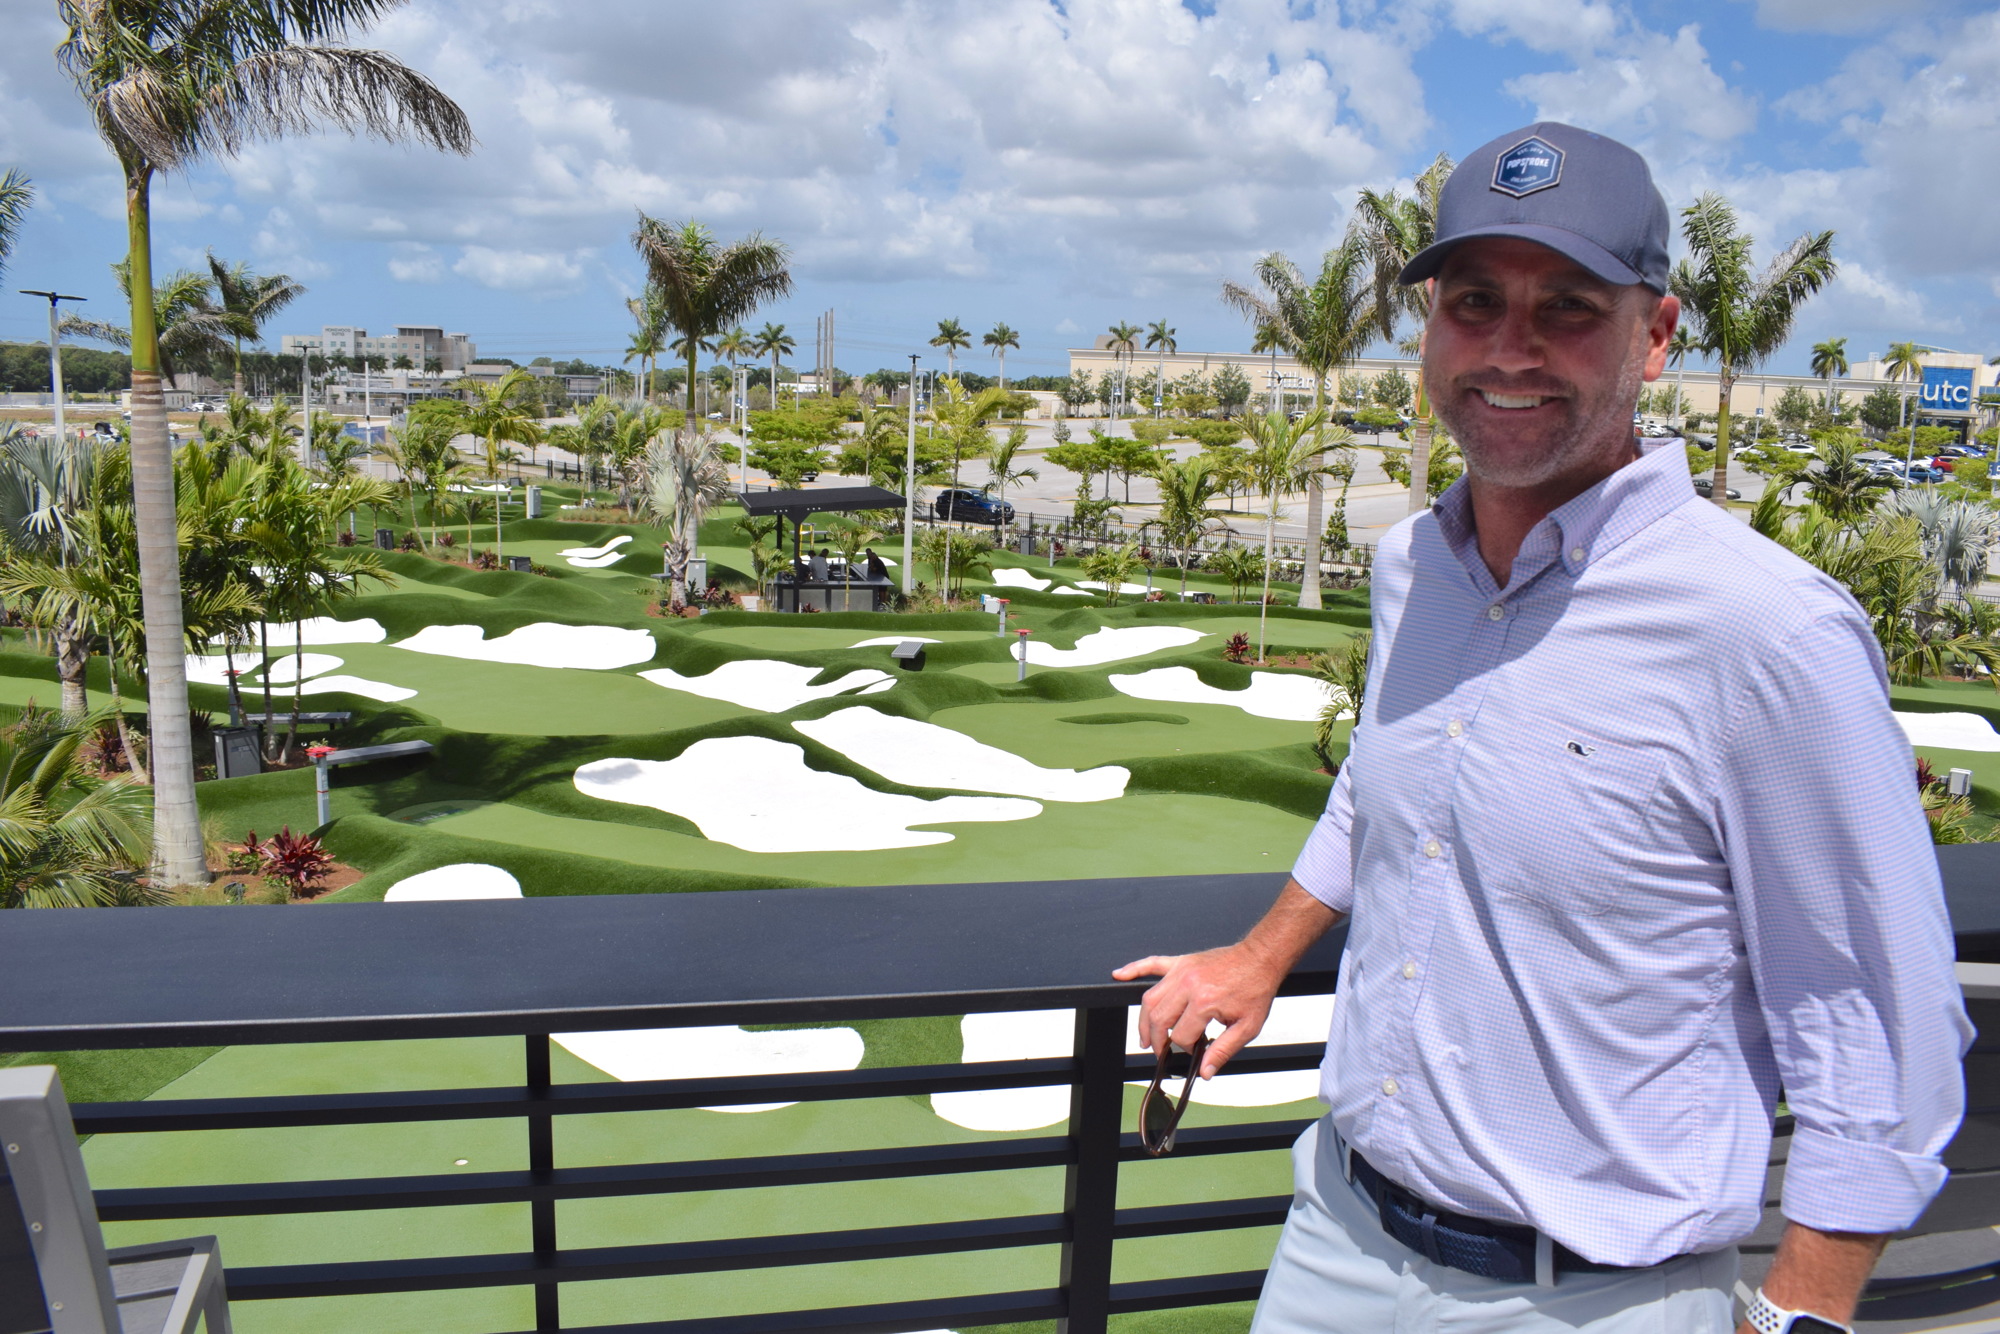 PopStroke founder Greg Bartoli said the Sarasota location was chosen to host the inaugural PopStroke Tour Championship because of its two-story size as well as the community's love of golf. (File photo.)